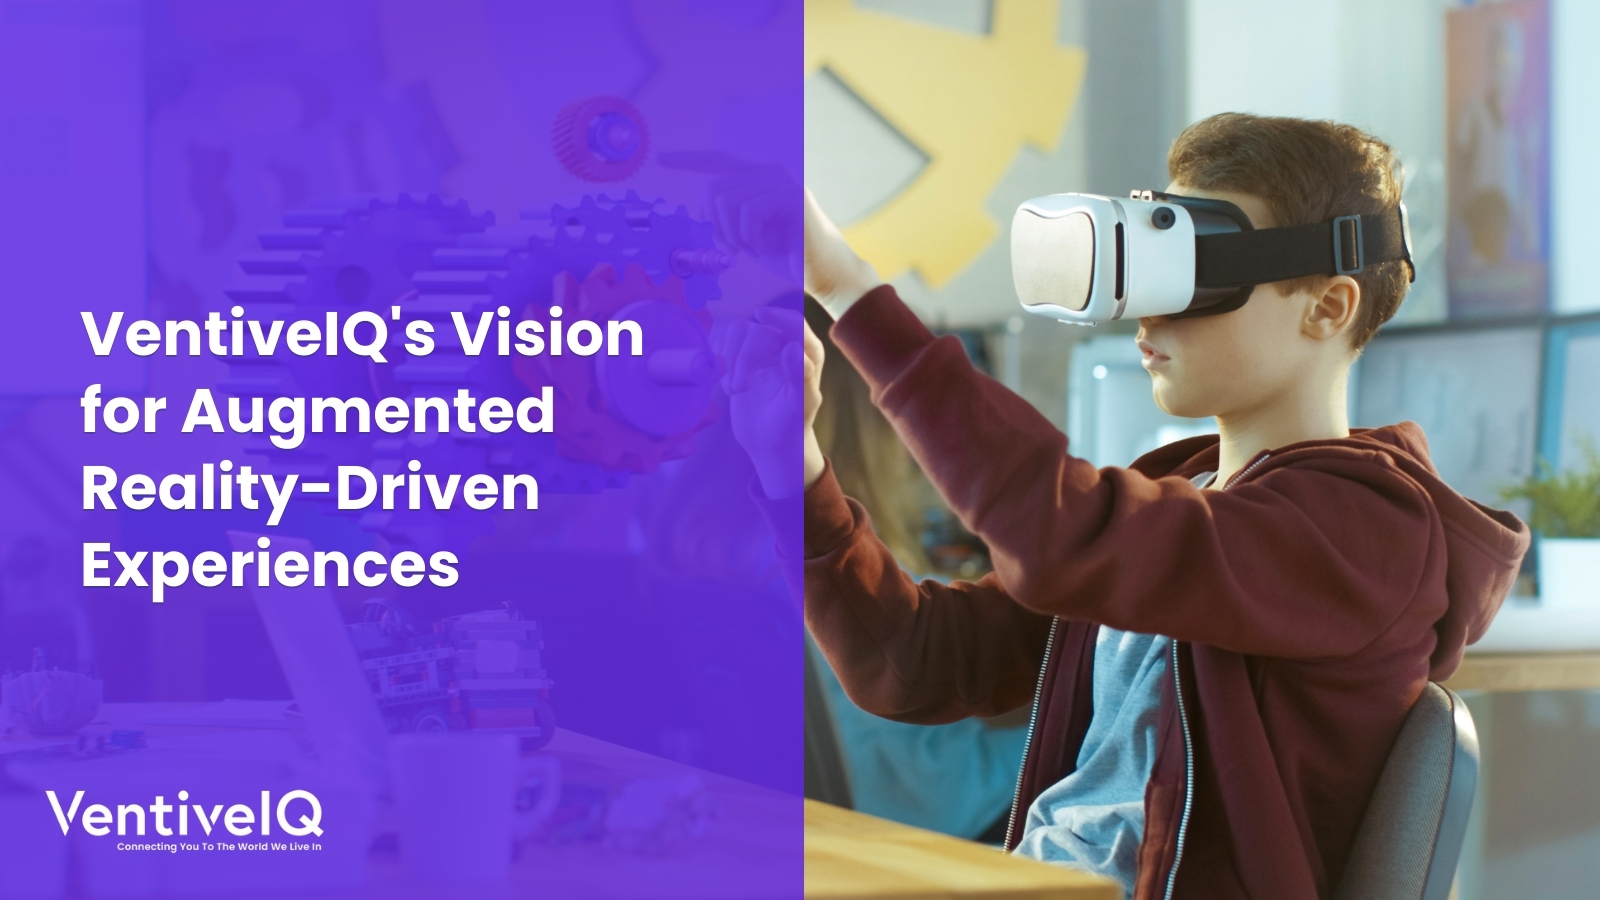 VentiveIQ’s Vision for Augmented Reality-Driven Experiences